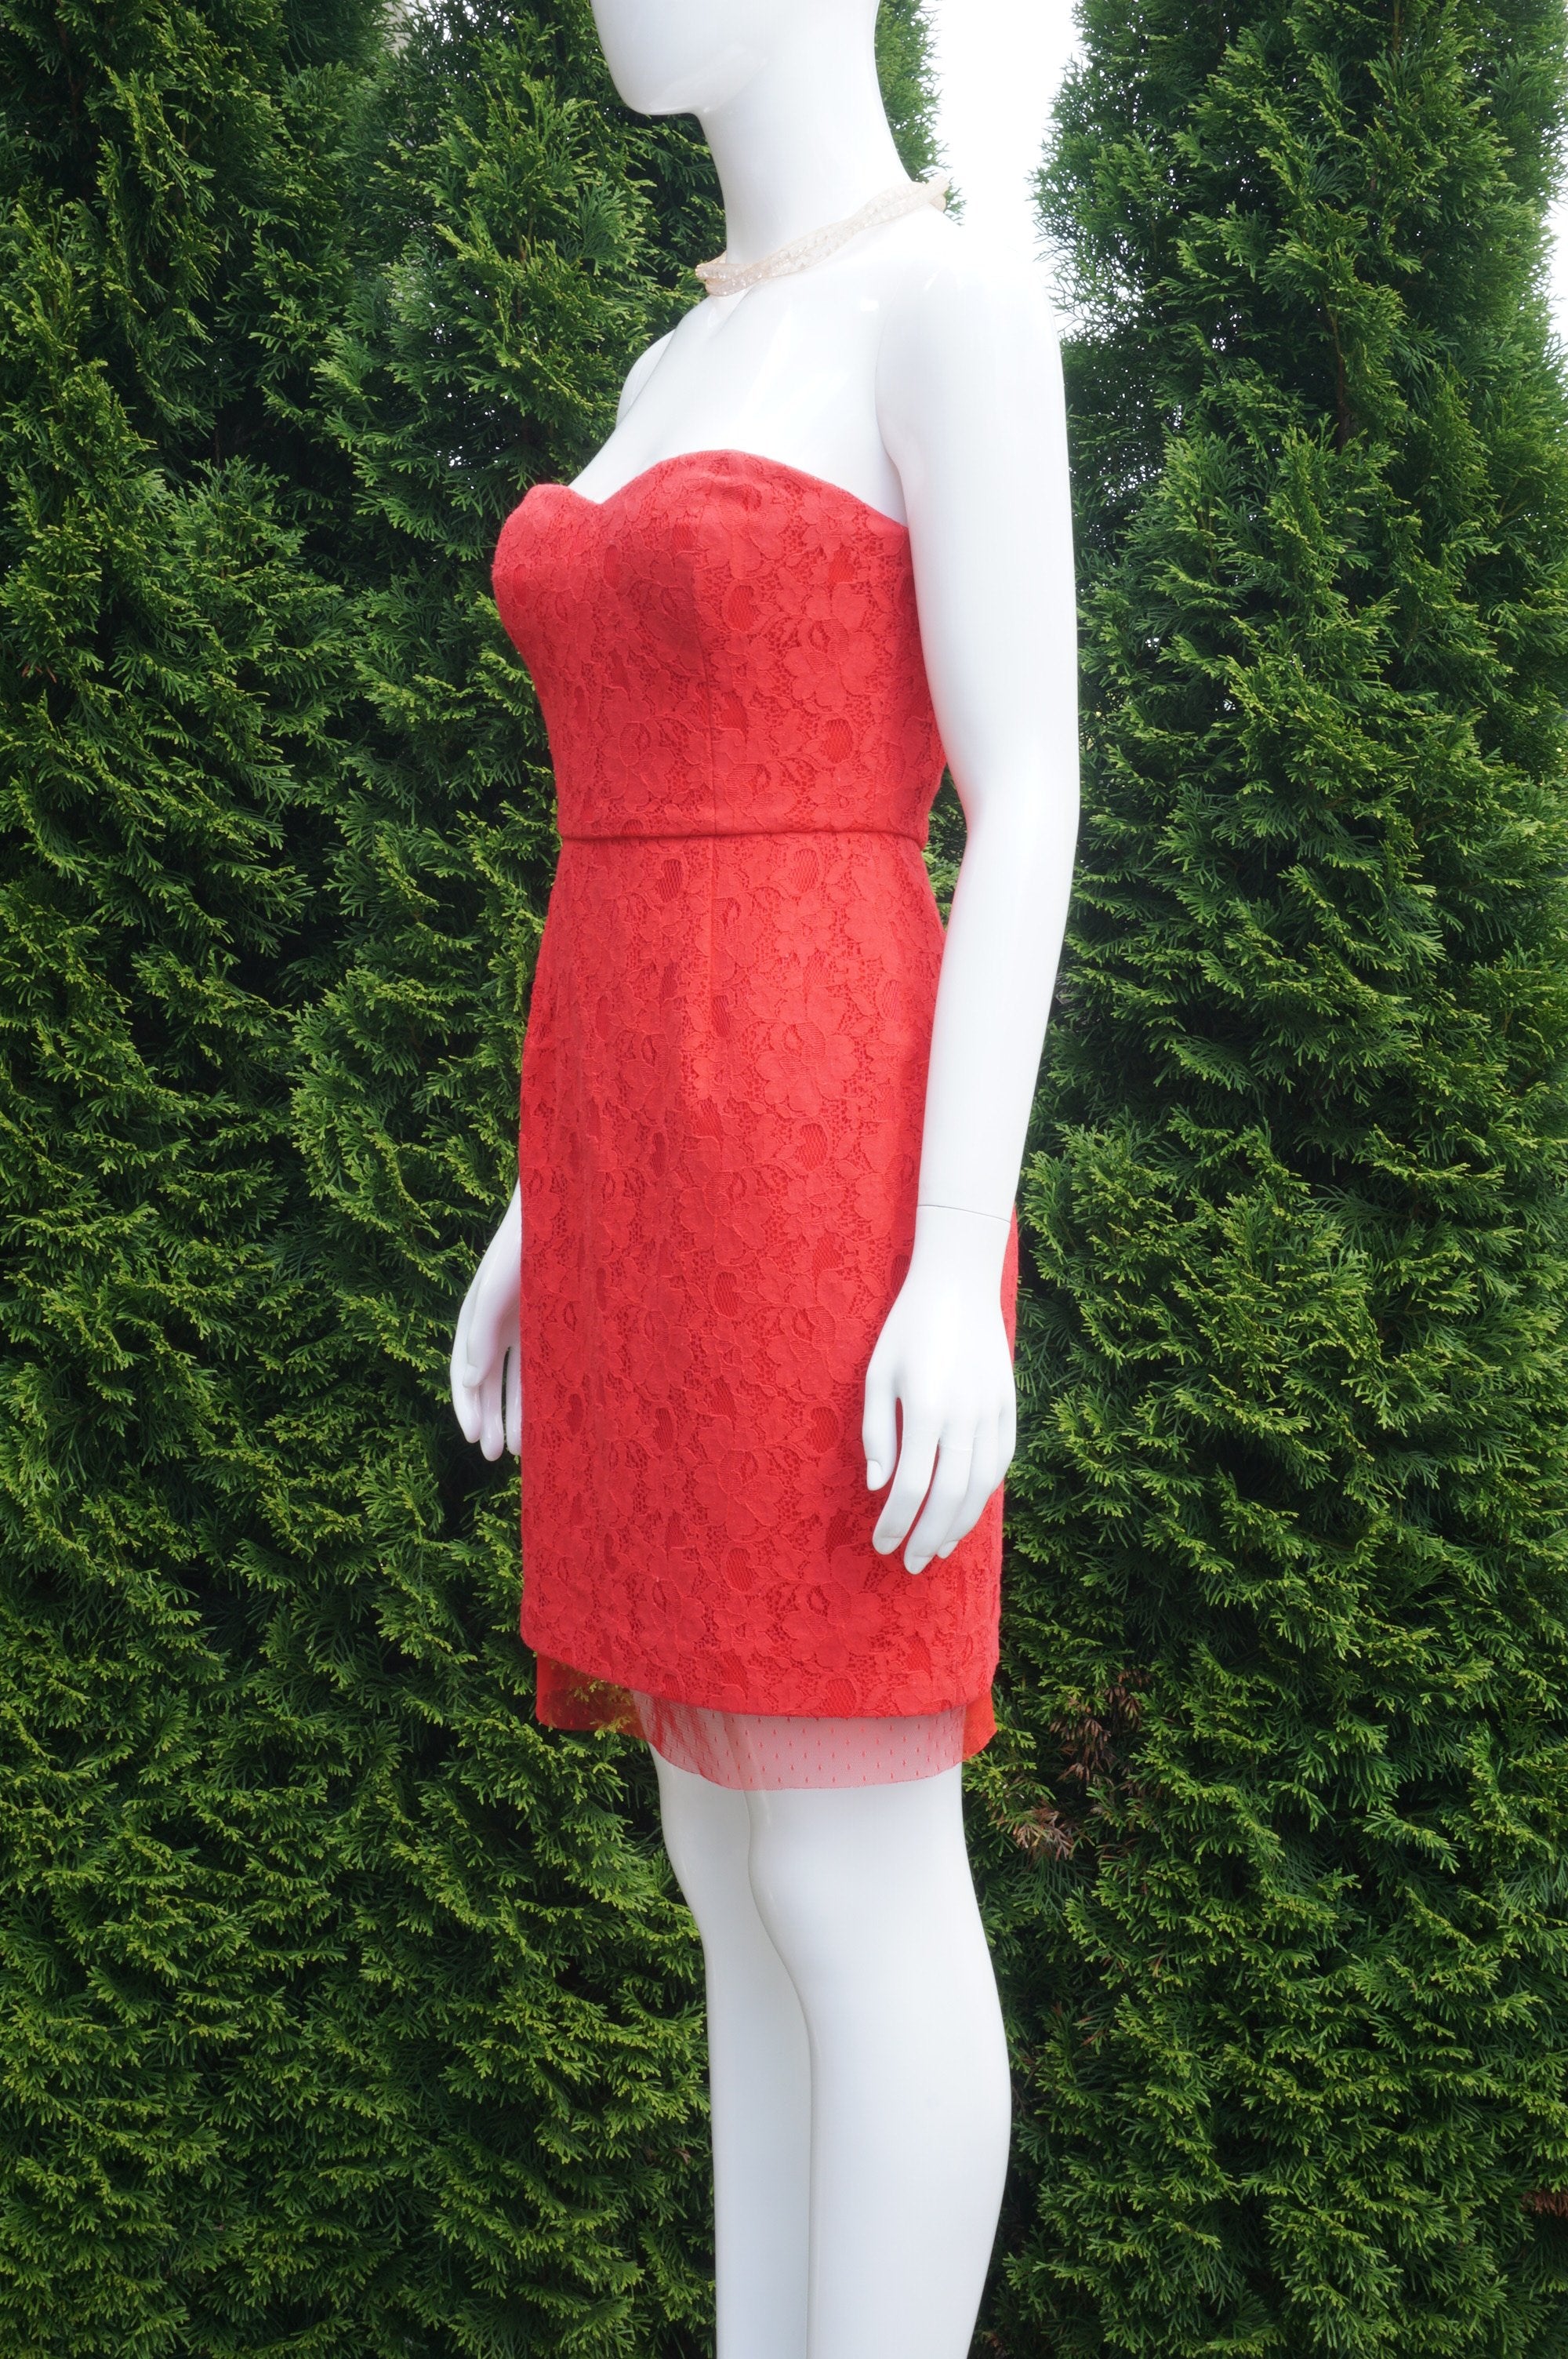 BCBGMAXAZRIA Red Lace Strapless Mini Dress,  Bust 33 inches, waist 26 inches, length 30 inches. Sticky liner inside of bra cups for added security. Zipper in back., Red, Shell: 77% Cotton, 23% Nylon. Lining: 100% Polyester, women's Dresses & Rompers, women's Red Dresses & Rompers, BCBGMAXAZRIA women's Dresses & Rompers, Mini dress, lace dress, strapless dress, cocktail dress